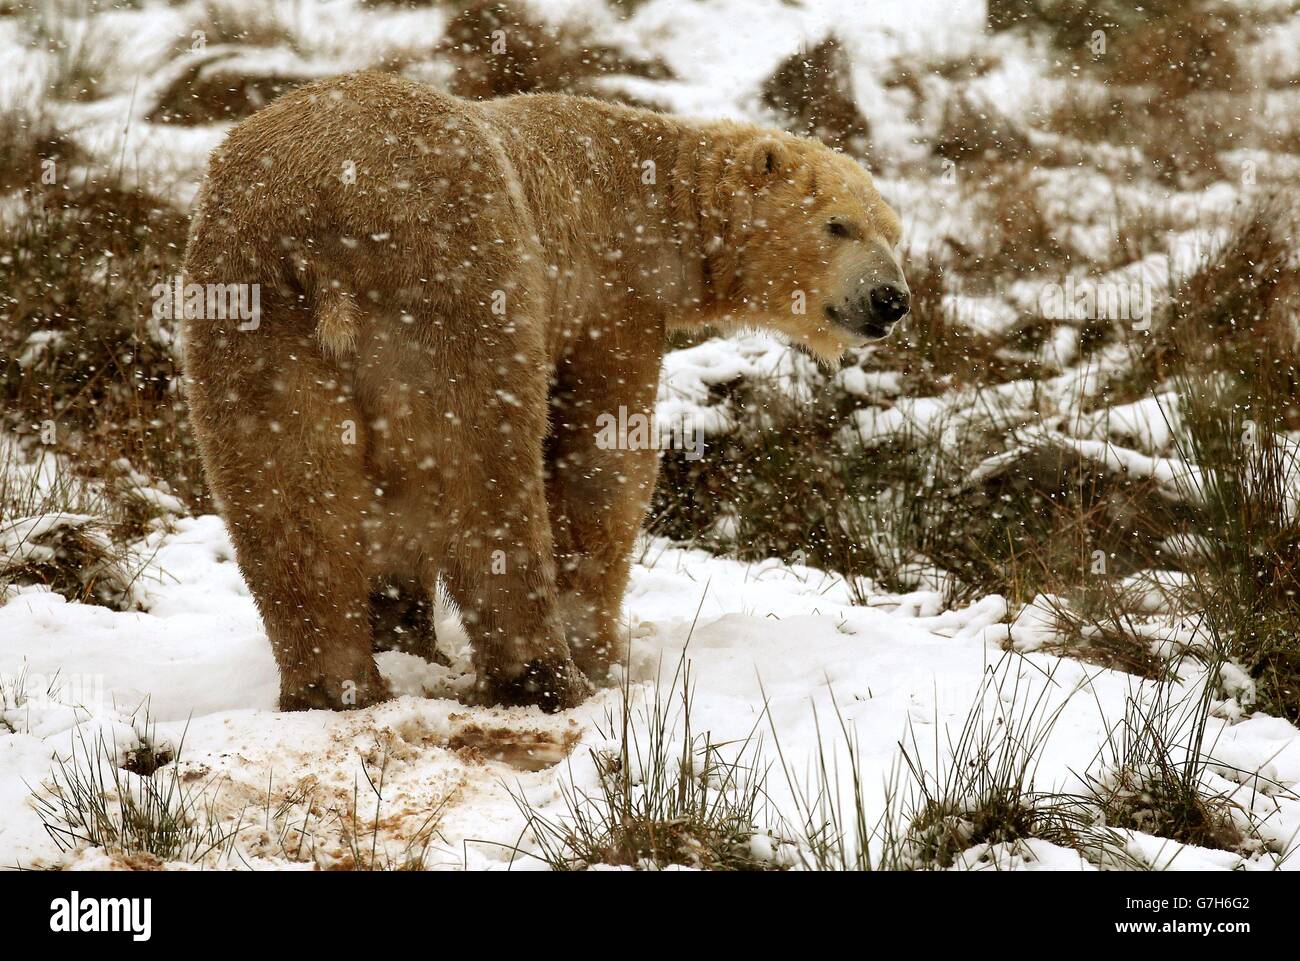 Scotland's only Polar Bears Walker (pictured) and Arktos in the snow, as they celebrate their joint birthday and tuck into special icy cakes at Highland Wildlife Park. Stock Photo